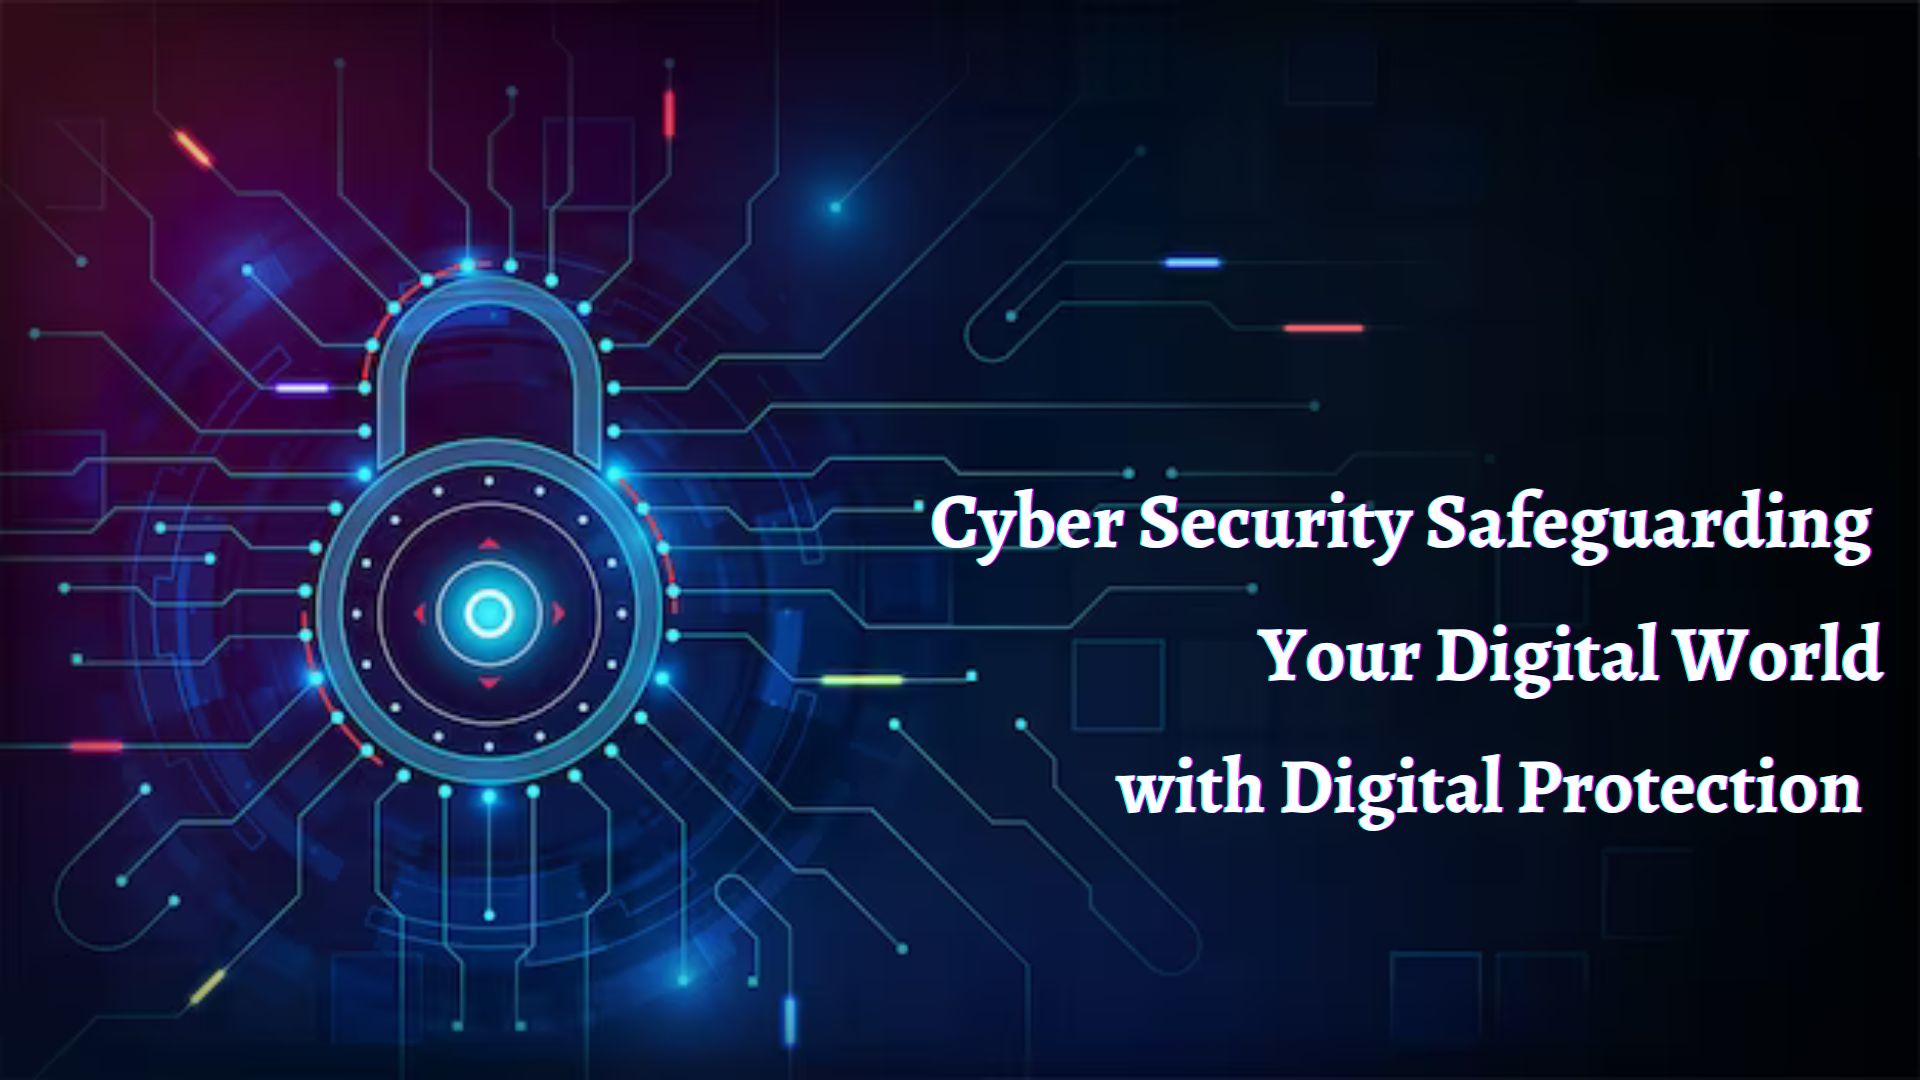 Cyber Security Safeguarding Your Digital World with Digital Protection